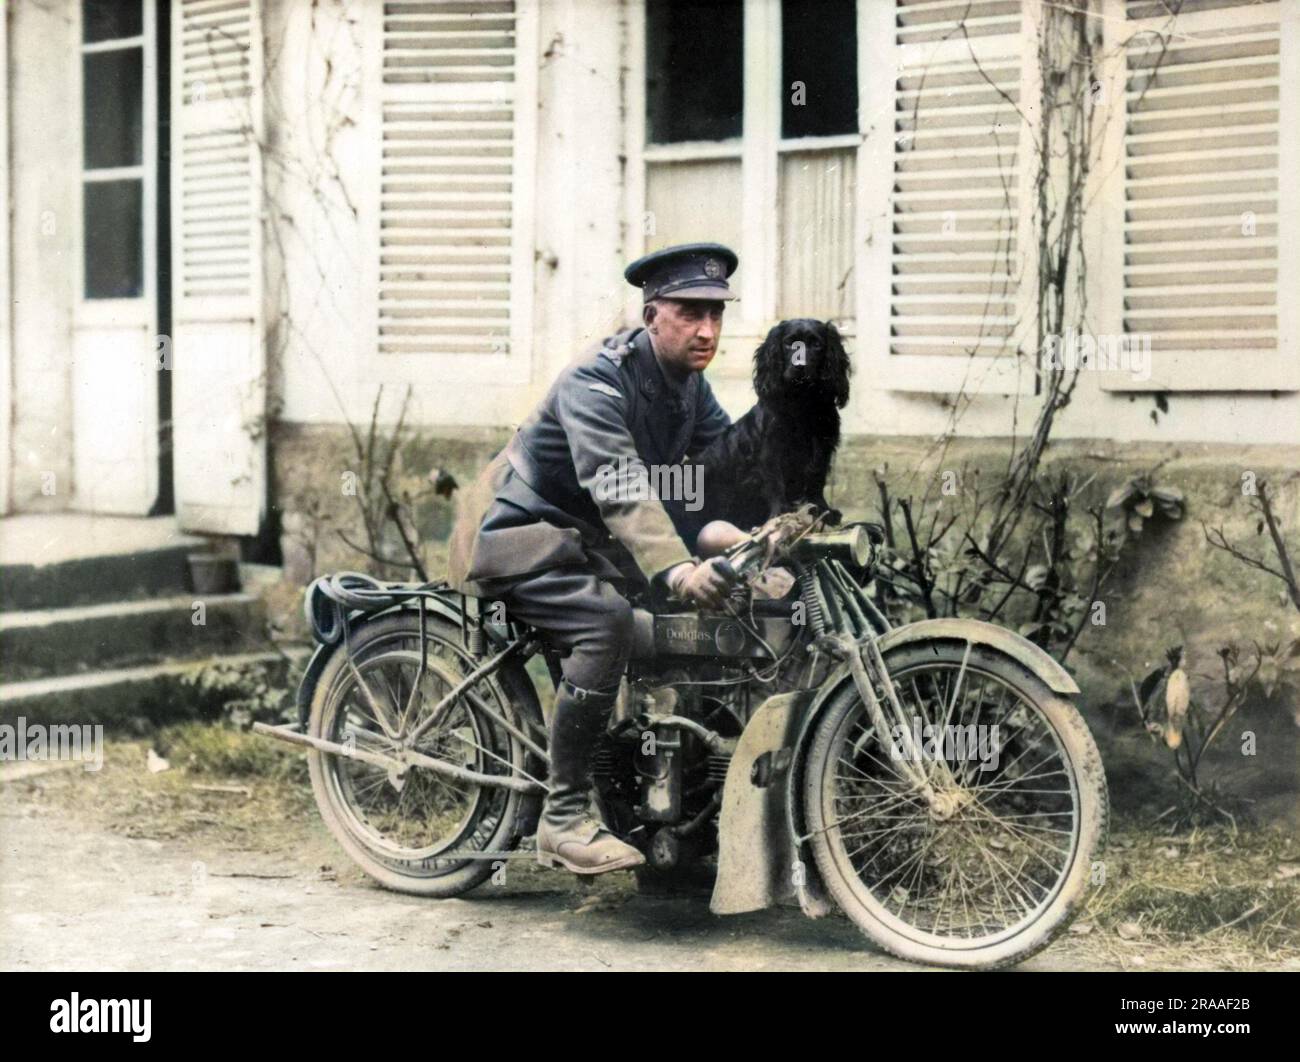 An officer of the Tank Corps on a Douglas motorbike with a spaniel dog (Stunter, the tank corps mascot), at Neulette, northern France, towards the end of the First World War.     Date: 03-May-18 Stock Photo